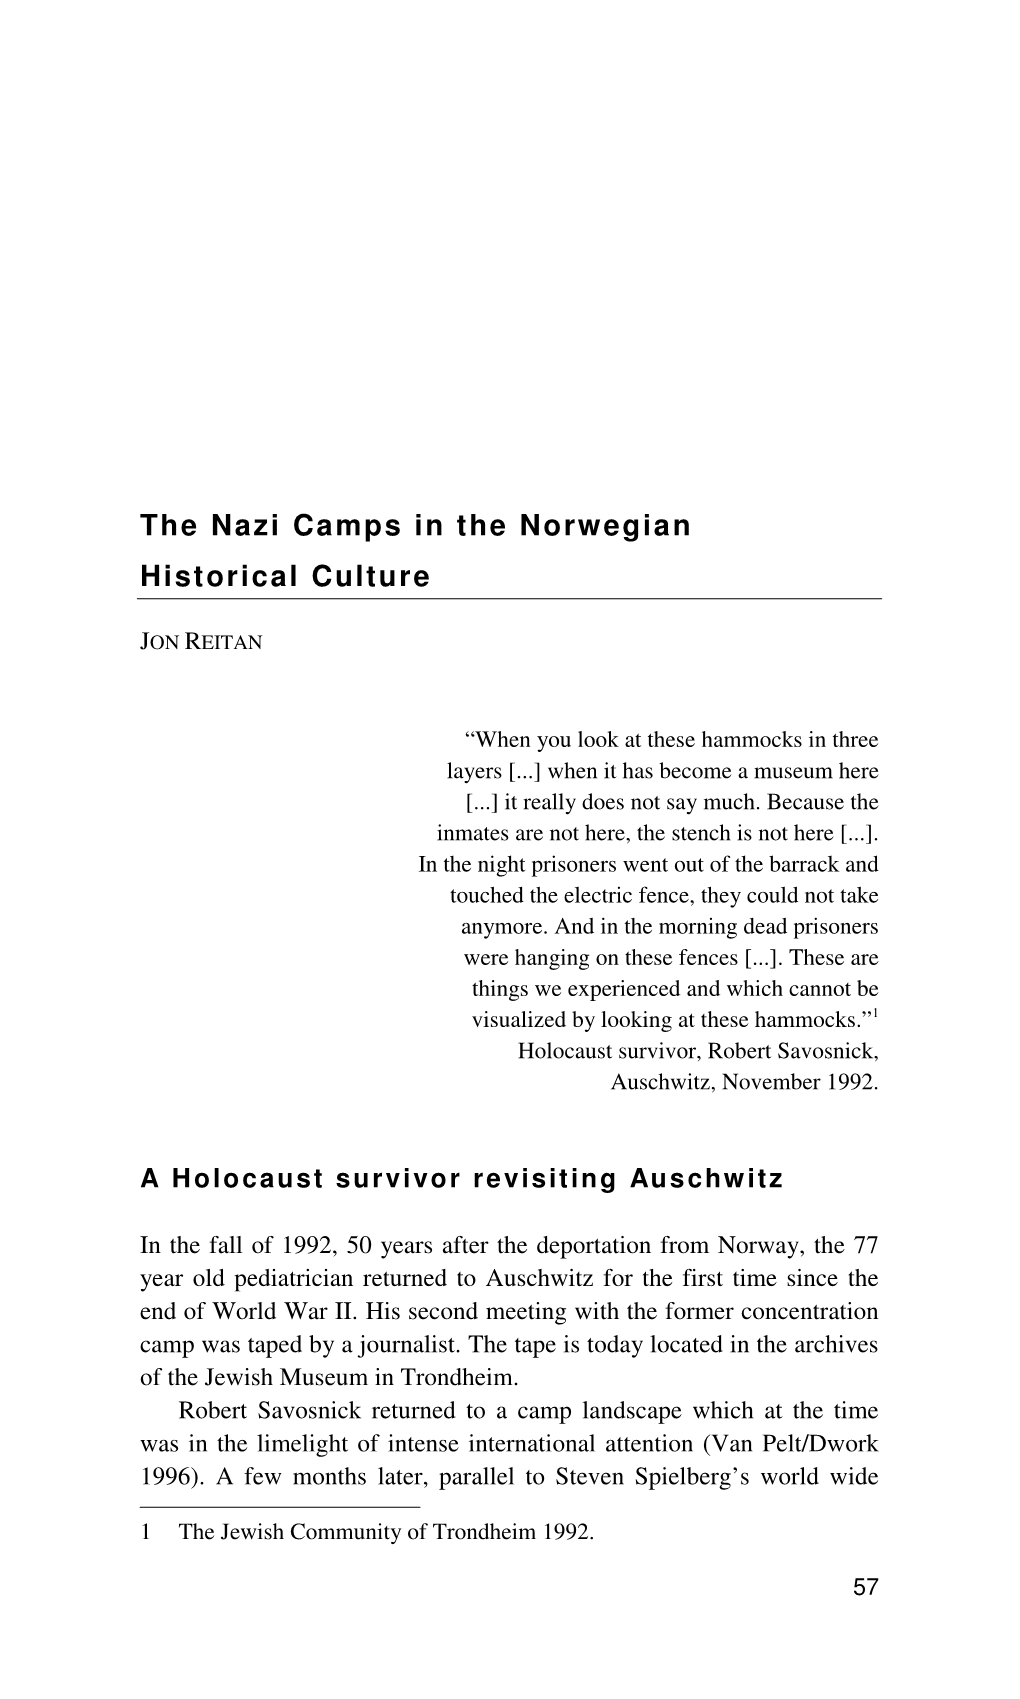 The Nazi Camps in the Norwegian Historical Culture